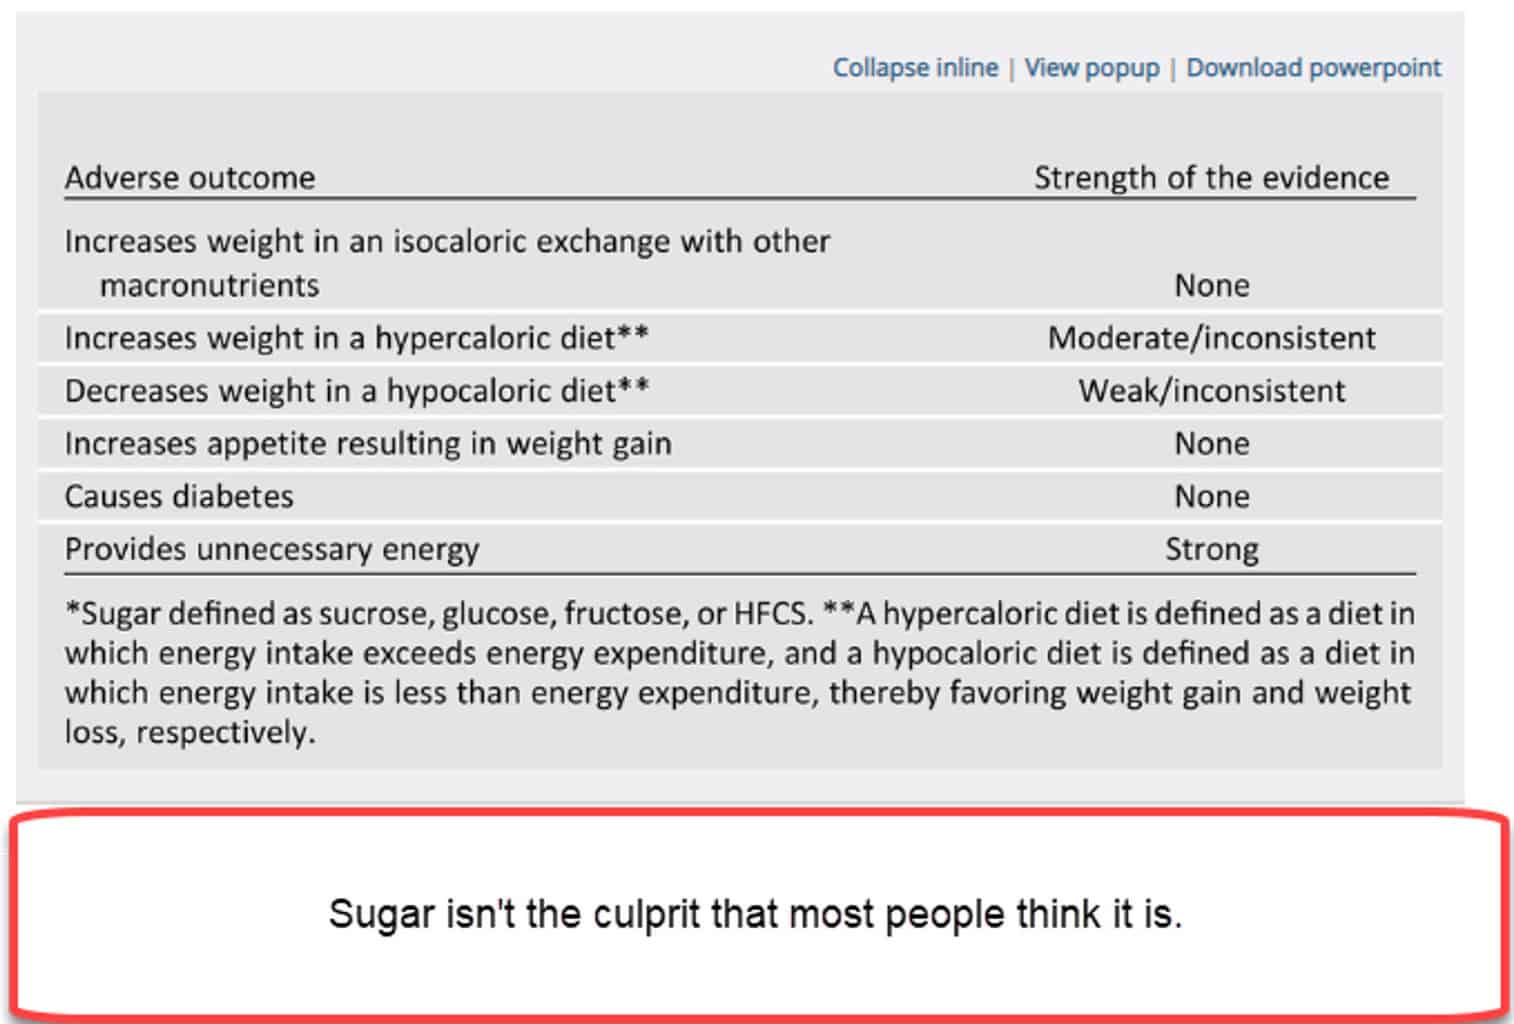 Sugar isn't the culprit that most people think it is.